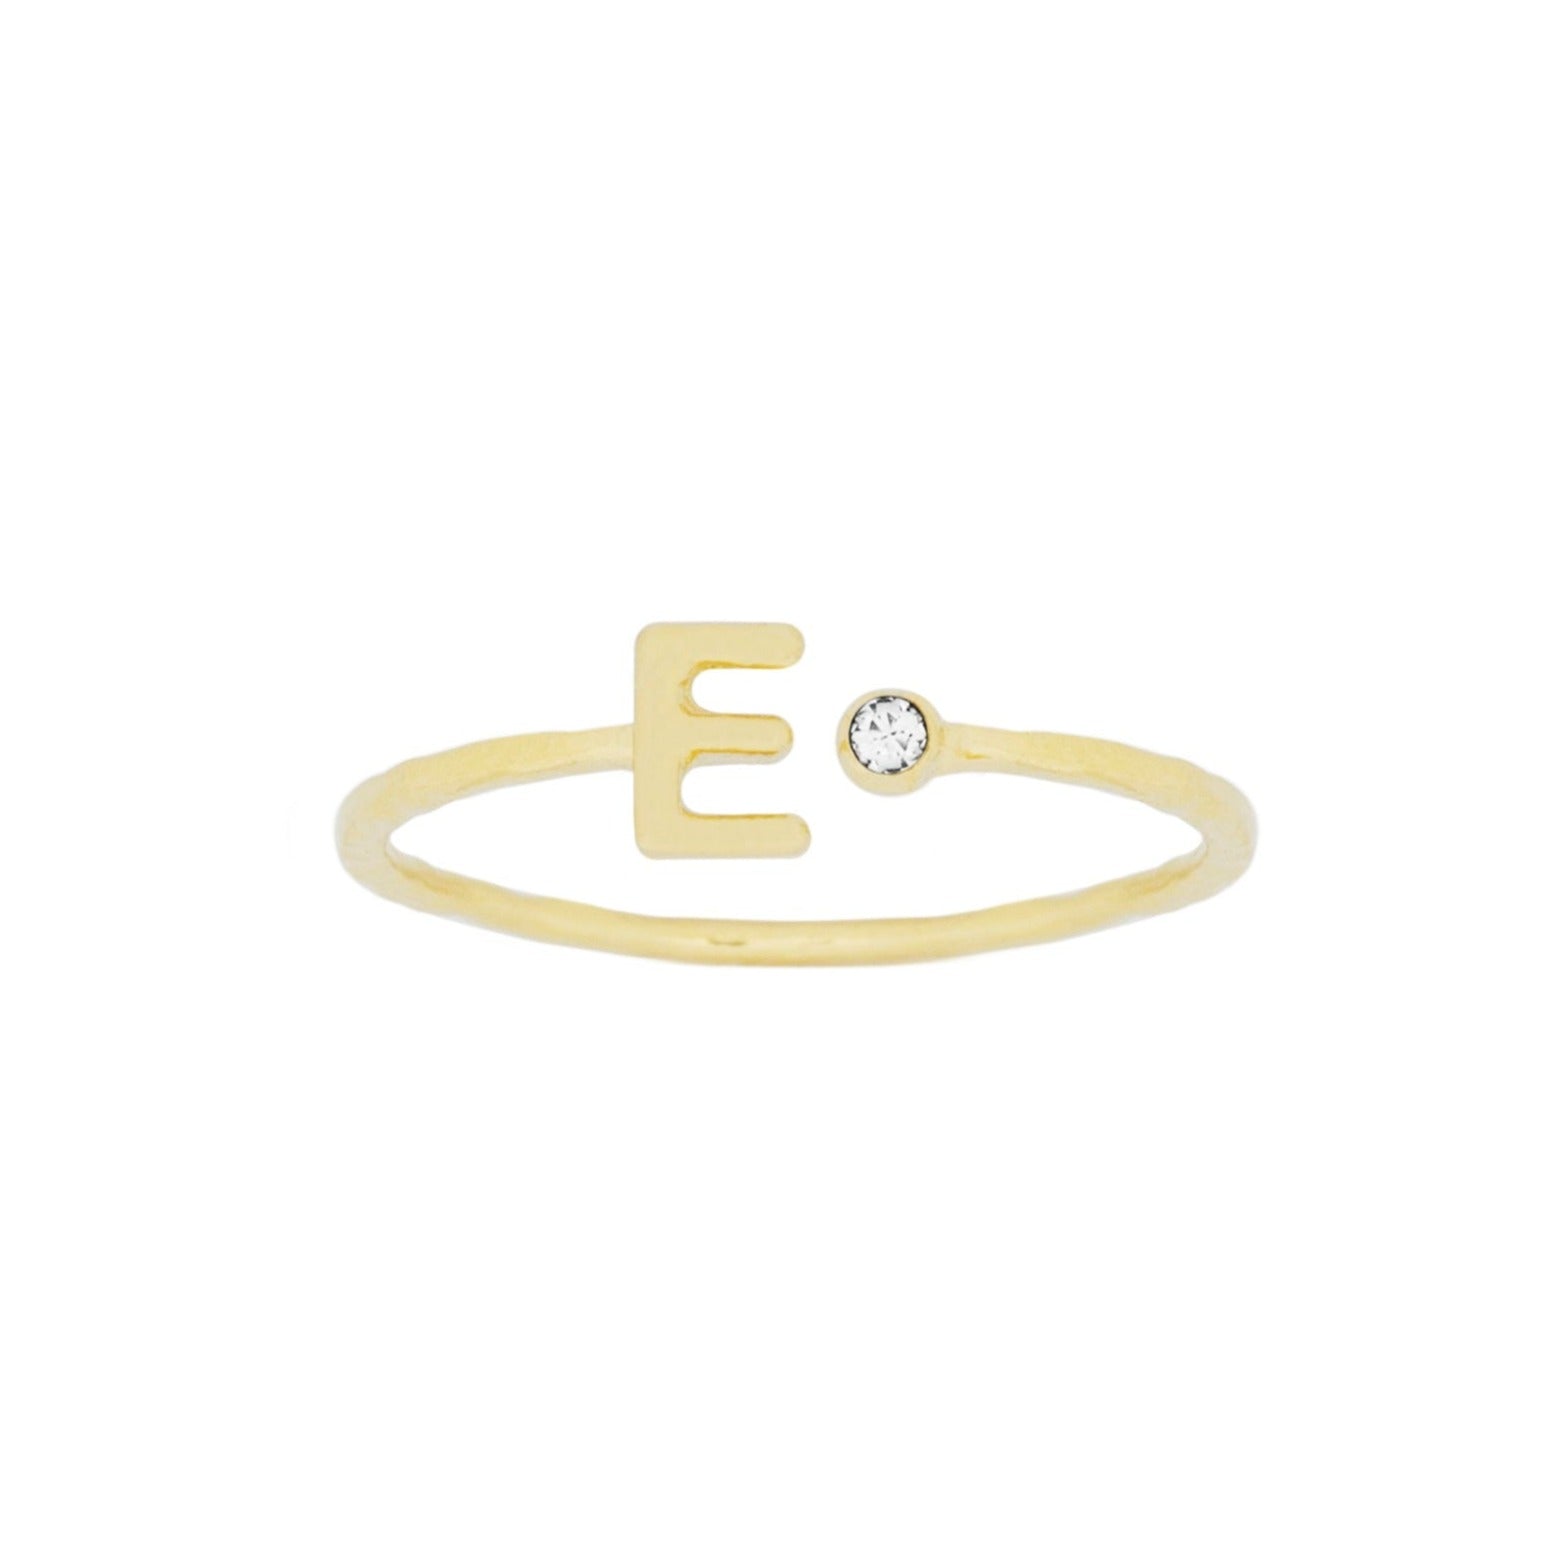 Dainty Gold Initial Ring handmade in America by Katie Dean Jewelry, stacking minimalist ring.